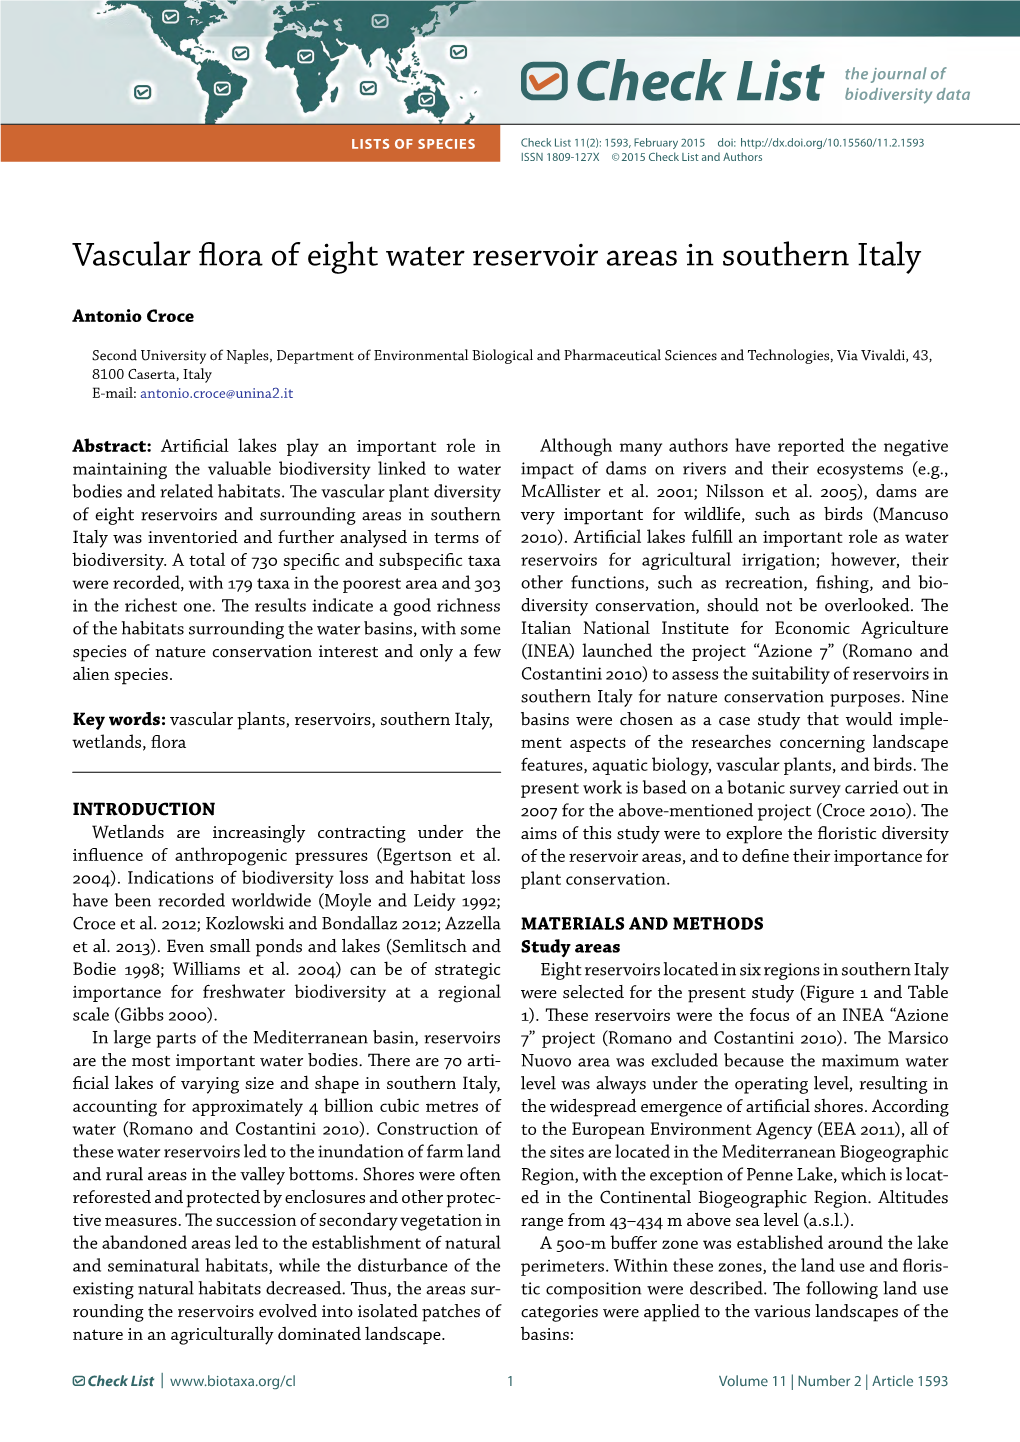 Vascular Flora of Eight Water Reservoir Areas in Southern Italy